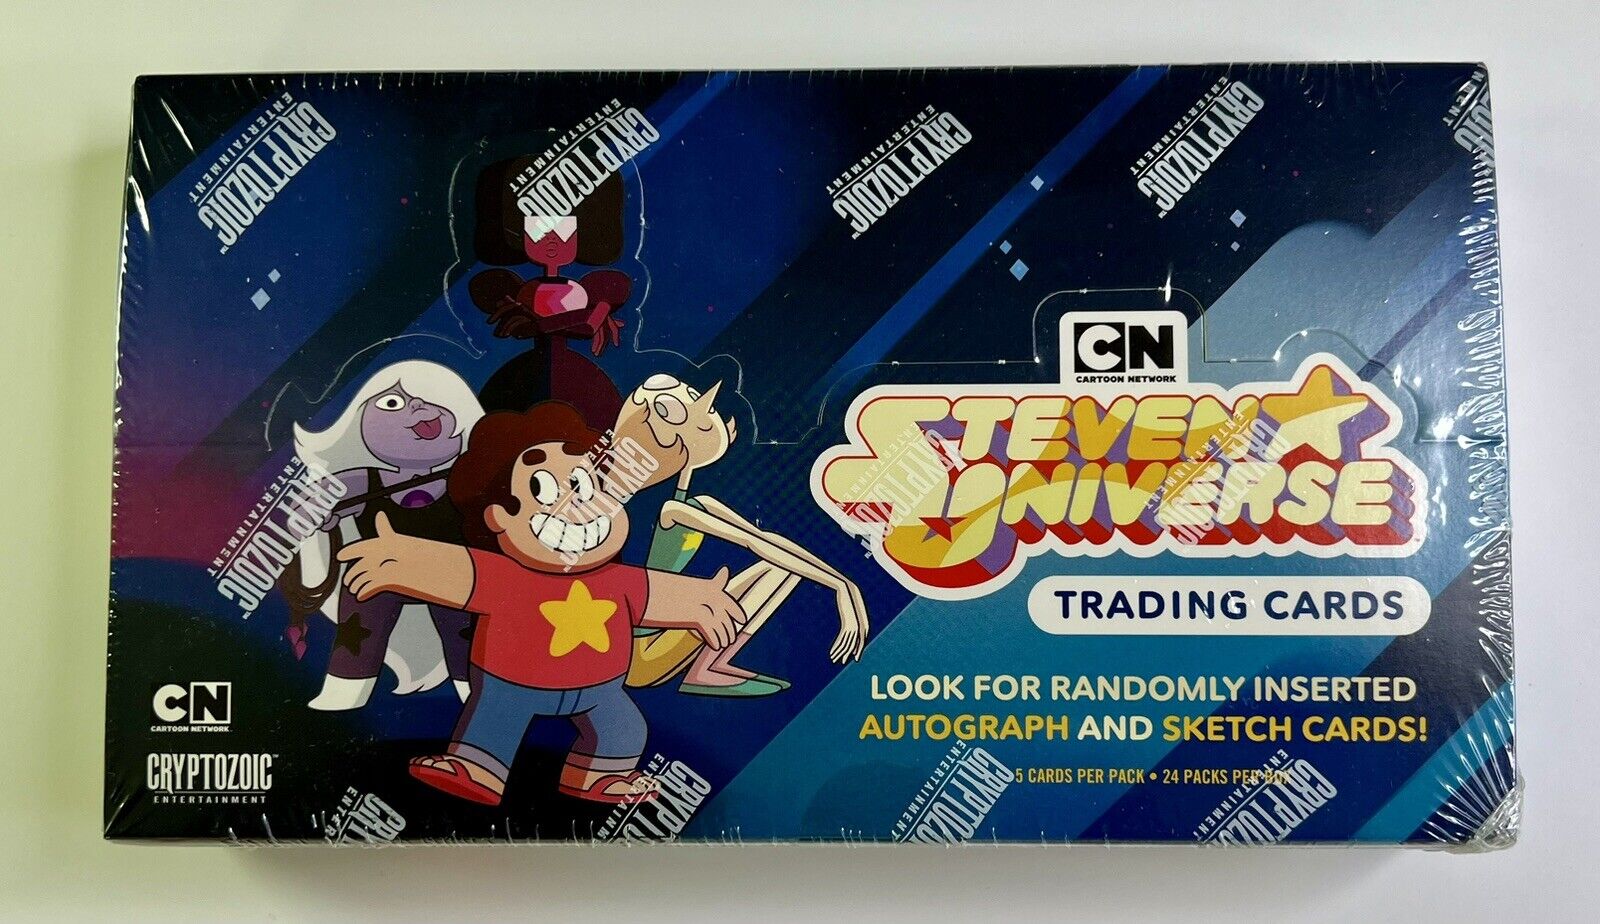 2019 Cryptozoic Steven Universe Trading Cards Hobby Box - Discontinued Rare